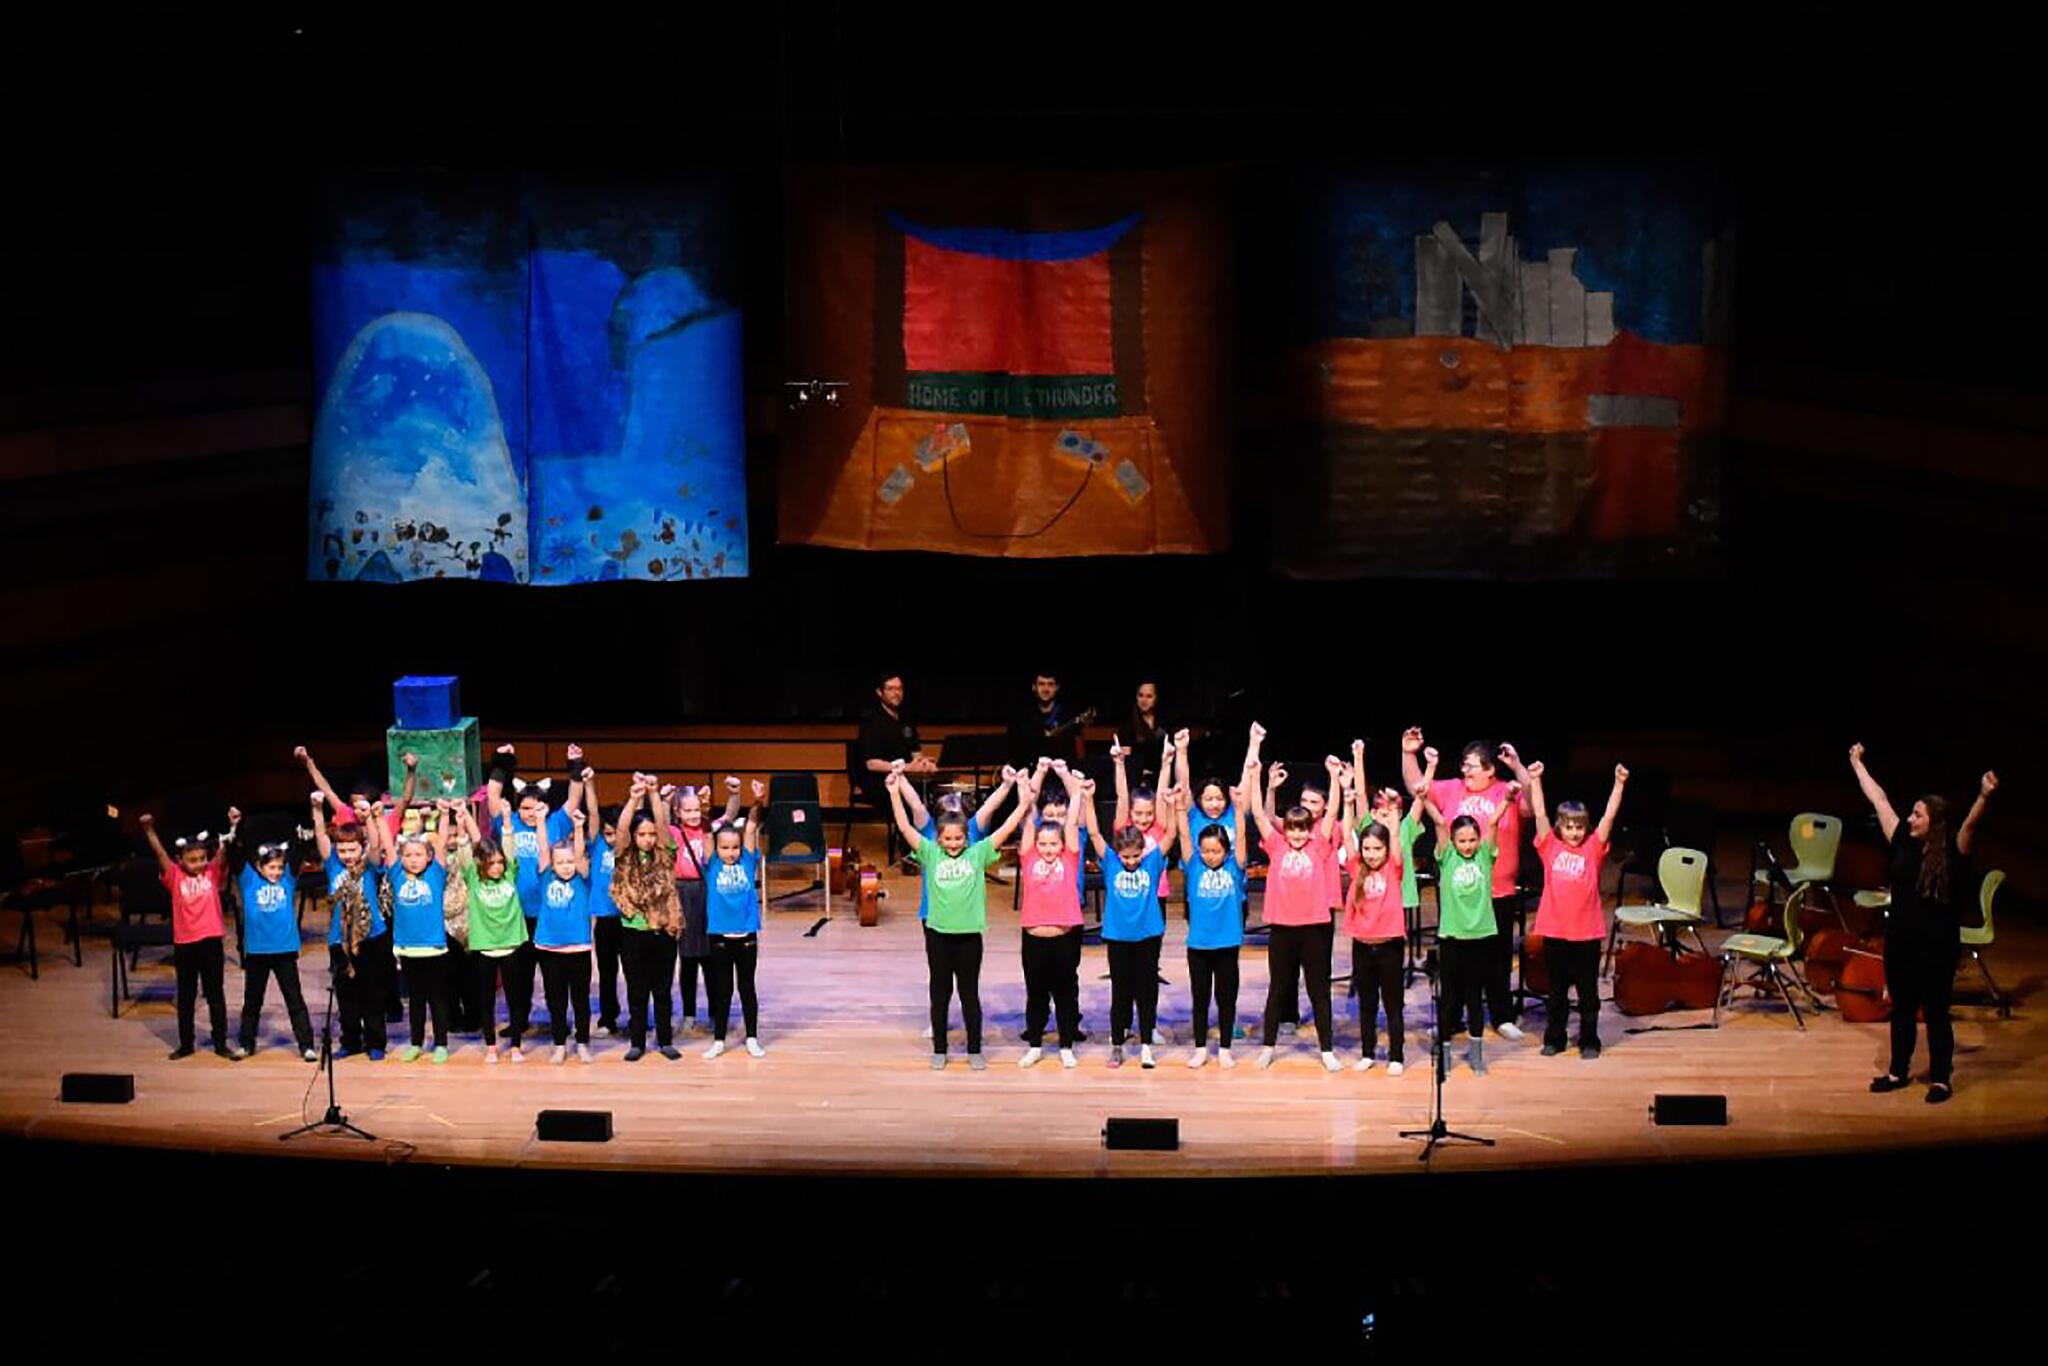 Children in colourful t-shirts stand on a stage with their arms raised preparing to bow.